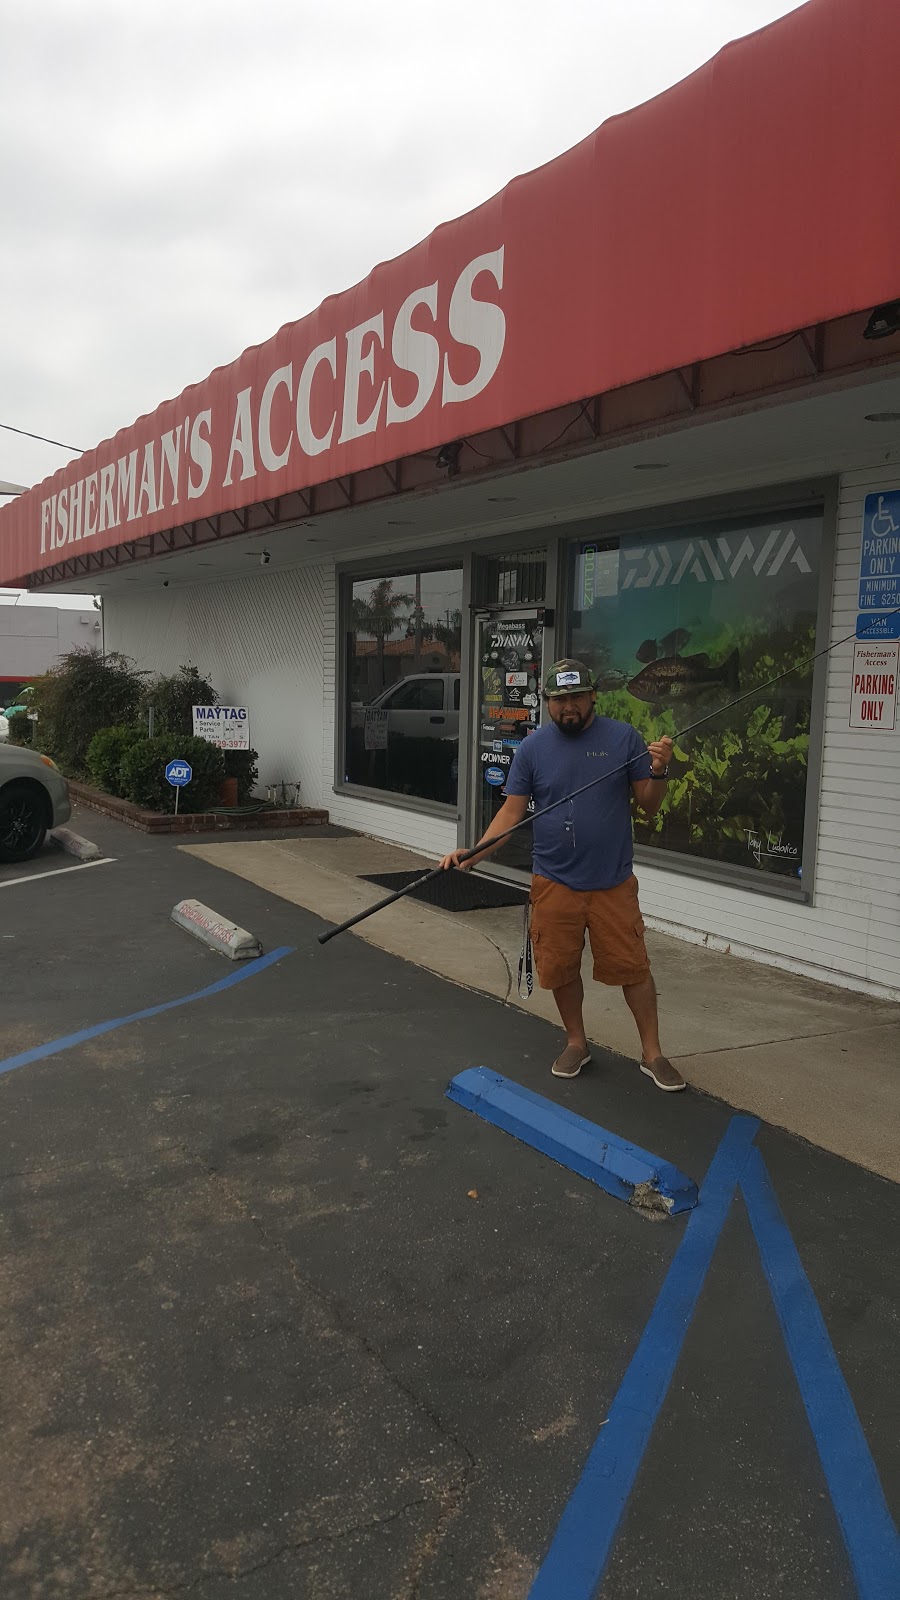 Fishermans Access | 524 E Imperial Hwy, Brea, CA 92821 | Phone: (714) 674-0064